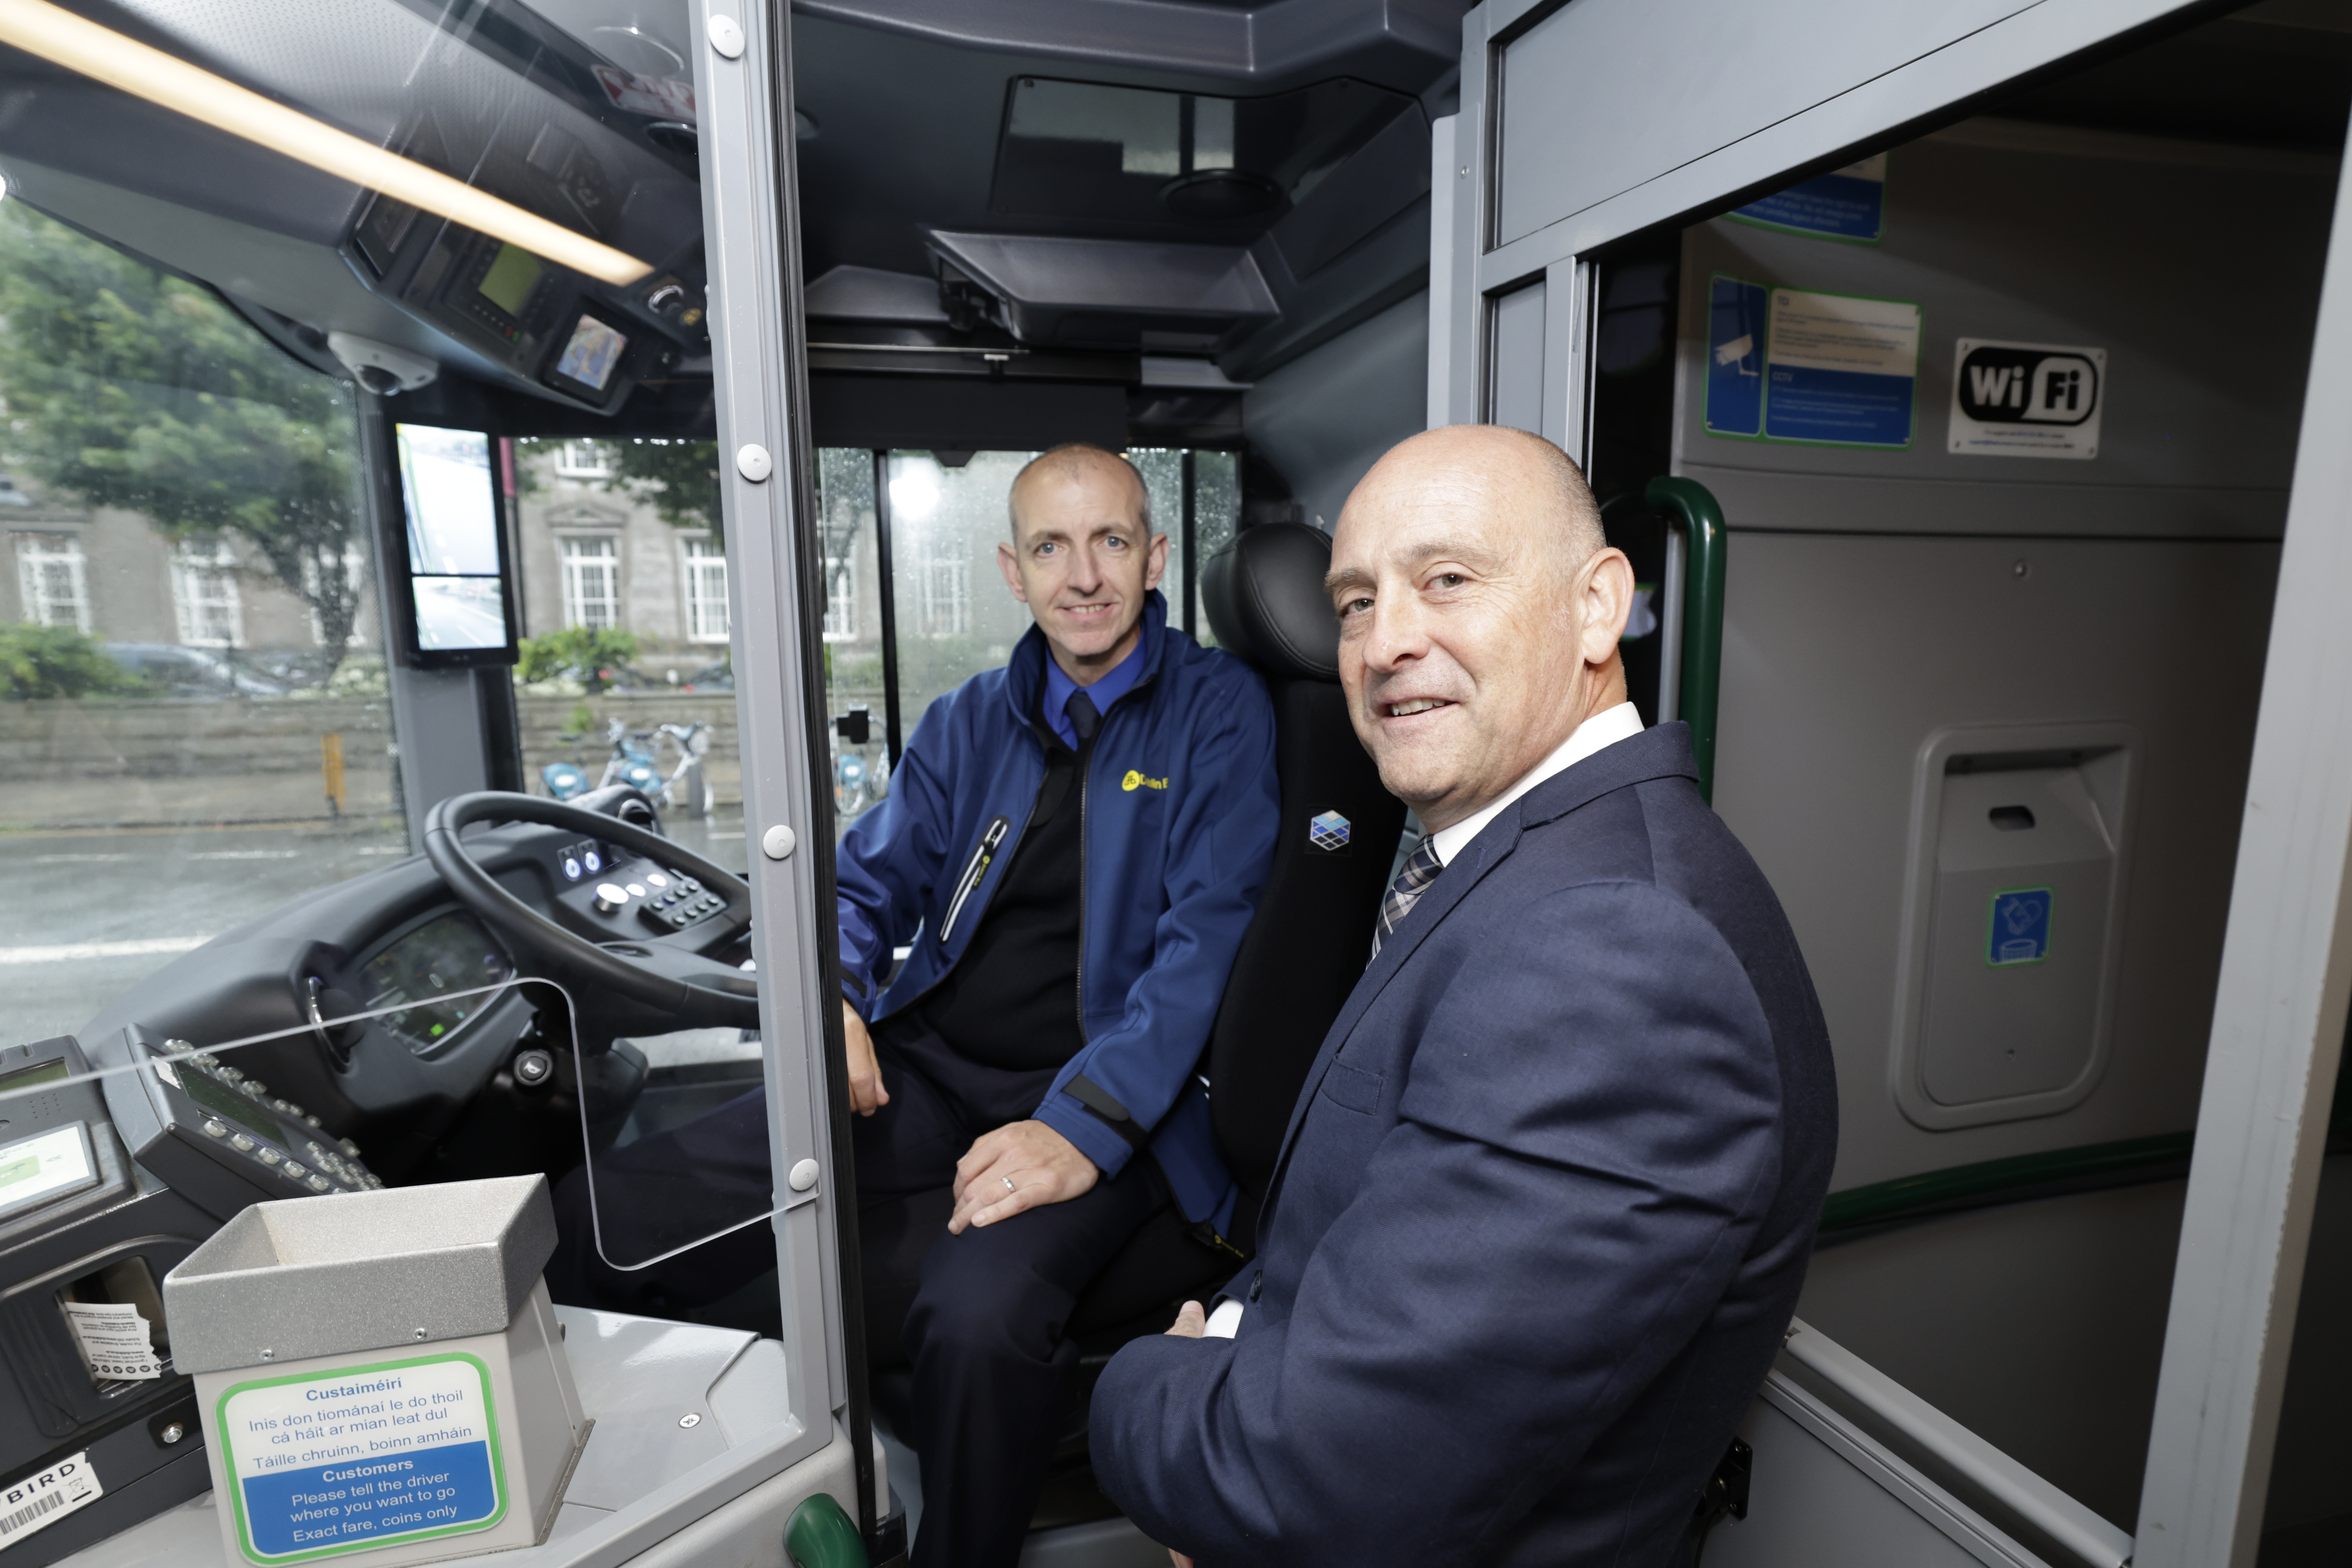 Image of Dublin Bus CEO and bus driver on bus